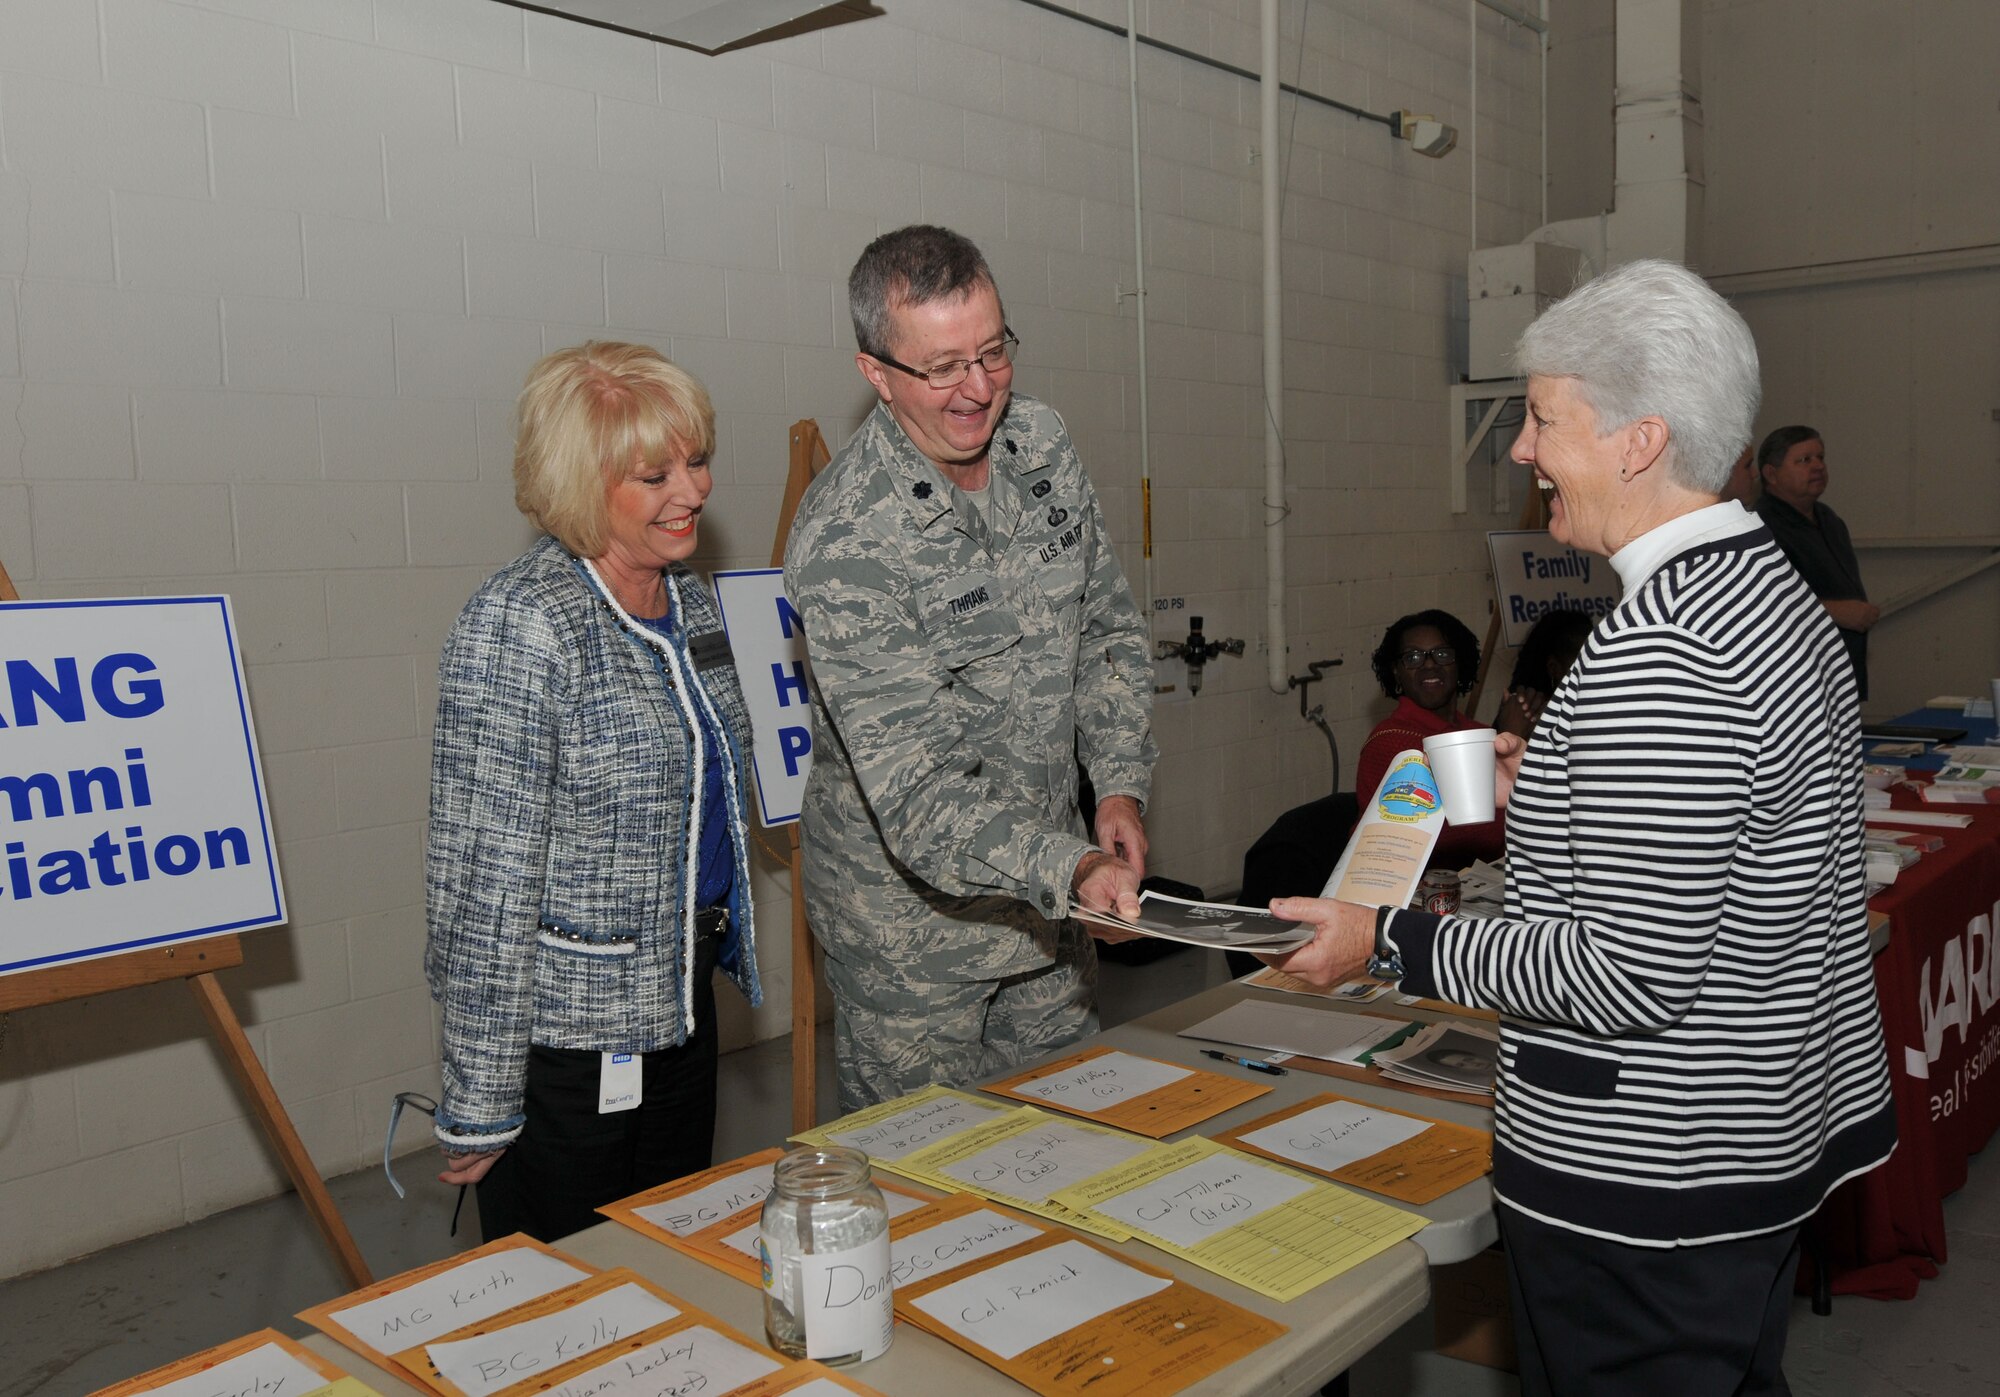 U.S. Air Force Lt. Col. David Thrams, Executive Officer for the 145th Maintenance Group, North Carolina Air National Guard, gives Sherry Hamrick, a former member of the 156th Aeromedical Evacuation Squadron, old photos of herself taken when she served in the NCANG.  Hamrick along with more than 150 other retirees attended the 18th Annual Retiree Breakfast held in a hanger at the North Carolina Air National Guard base, Charlotte Douglas Intl. Airport, Friday 25, 2013. (Air National Guard photo by Master Sgt. Patricia F. Moran/Released) 